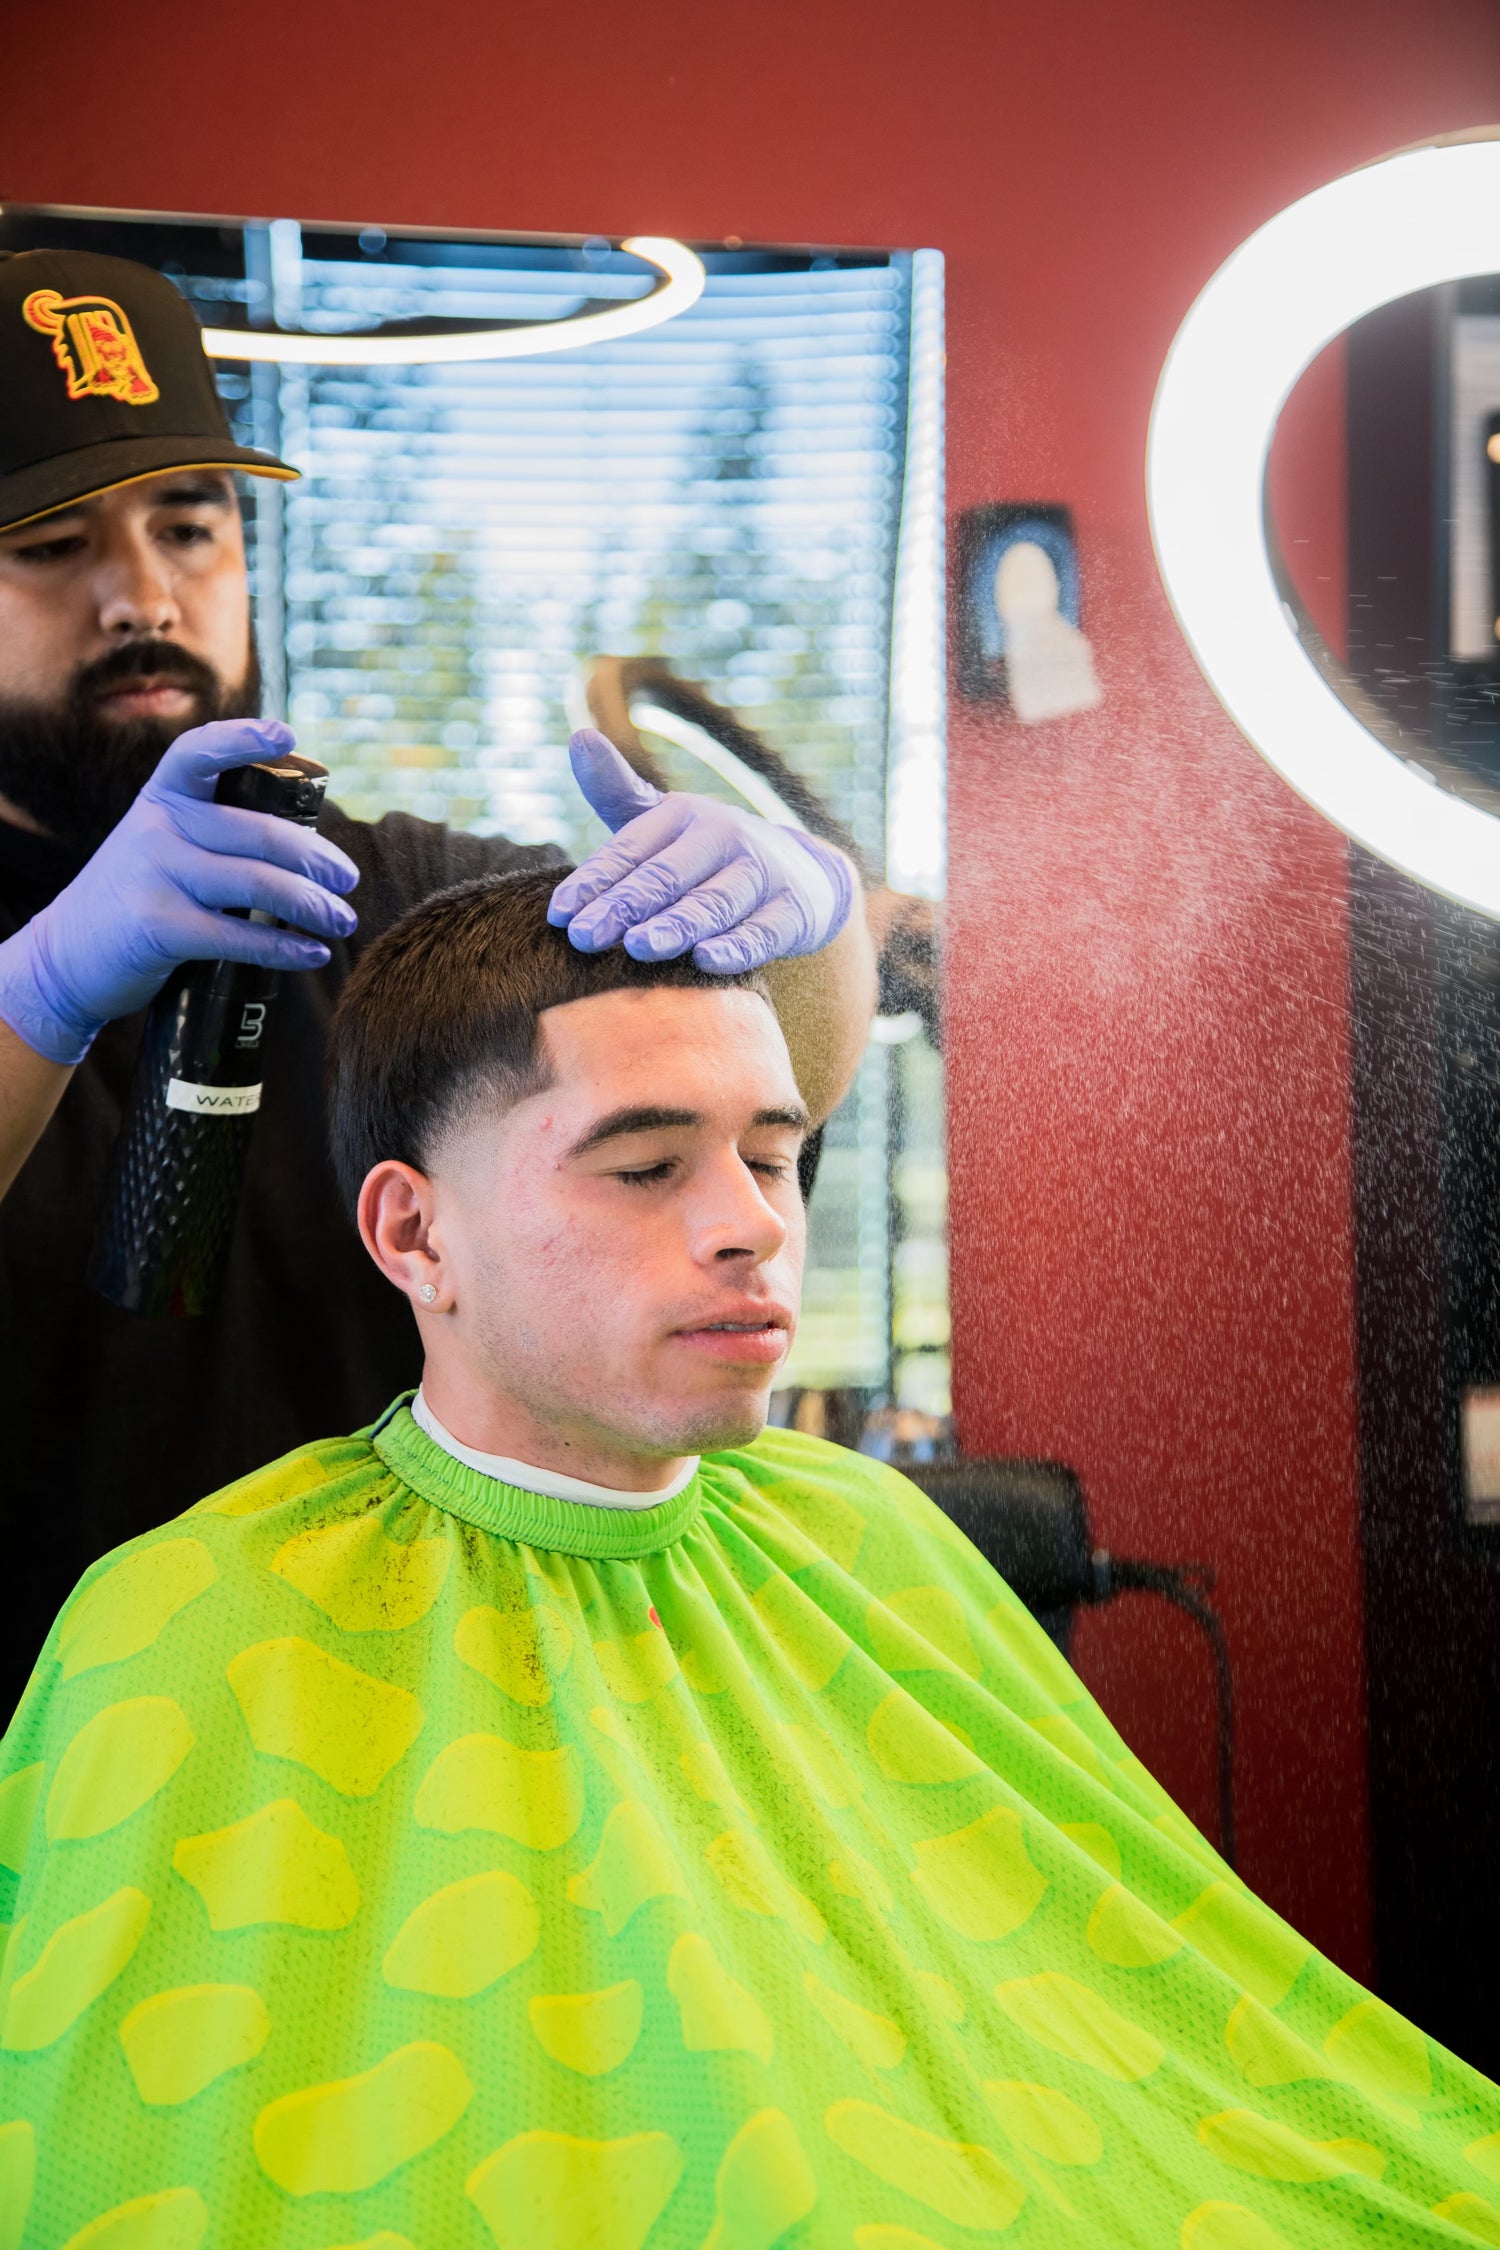 Barber in a black shirt giving a client with a green apron a haircut